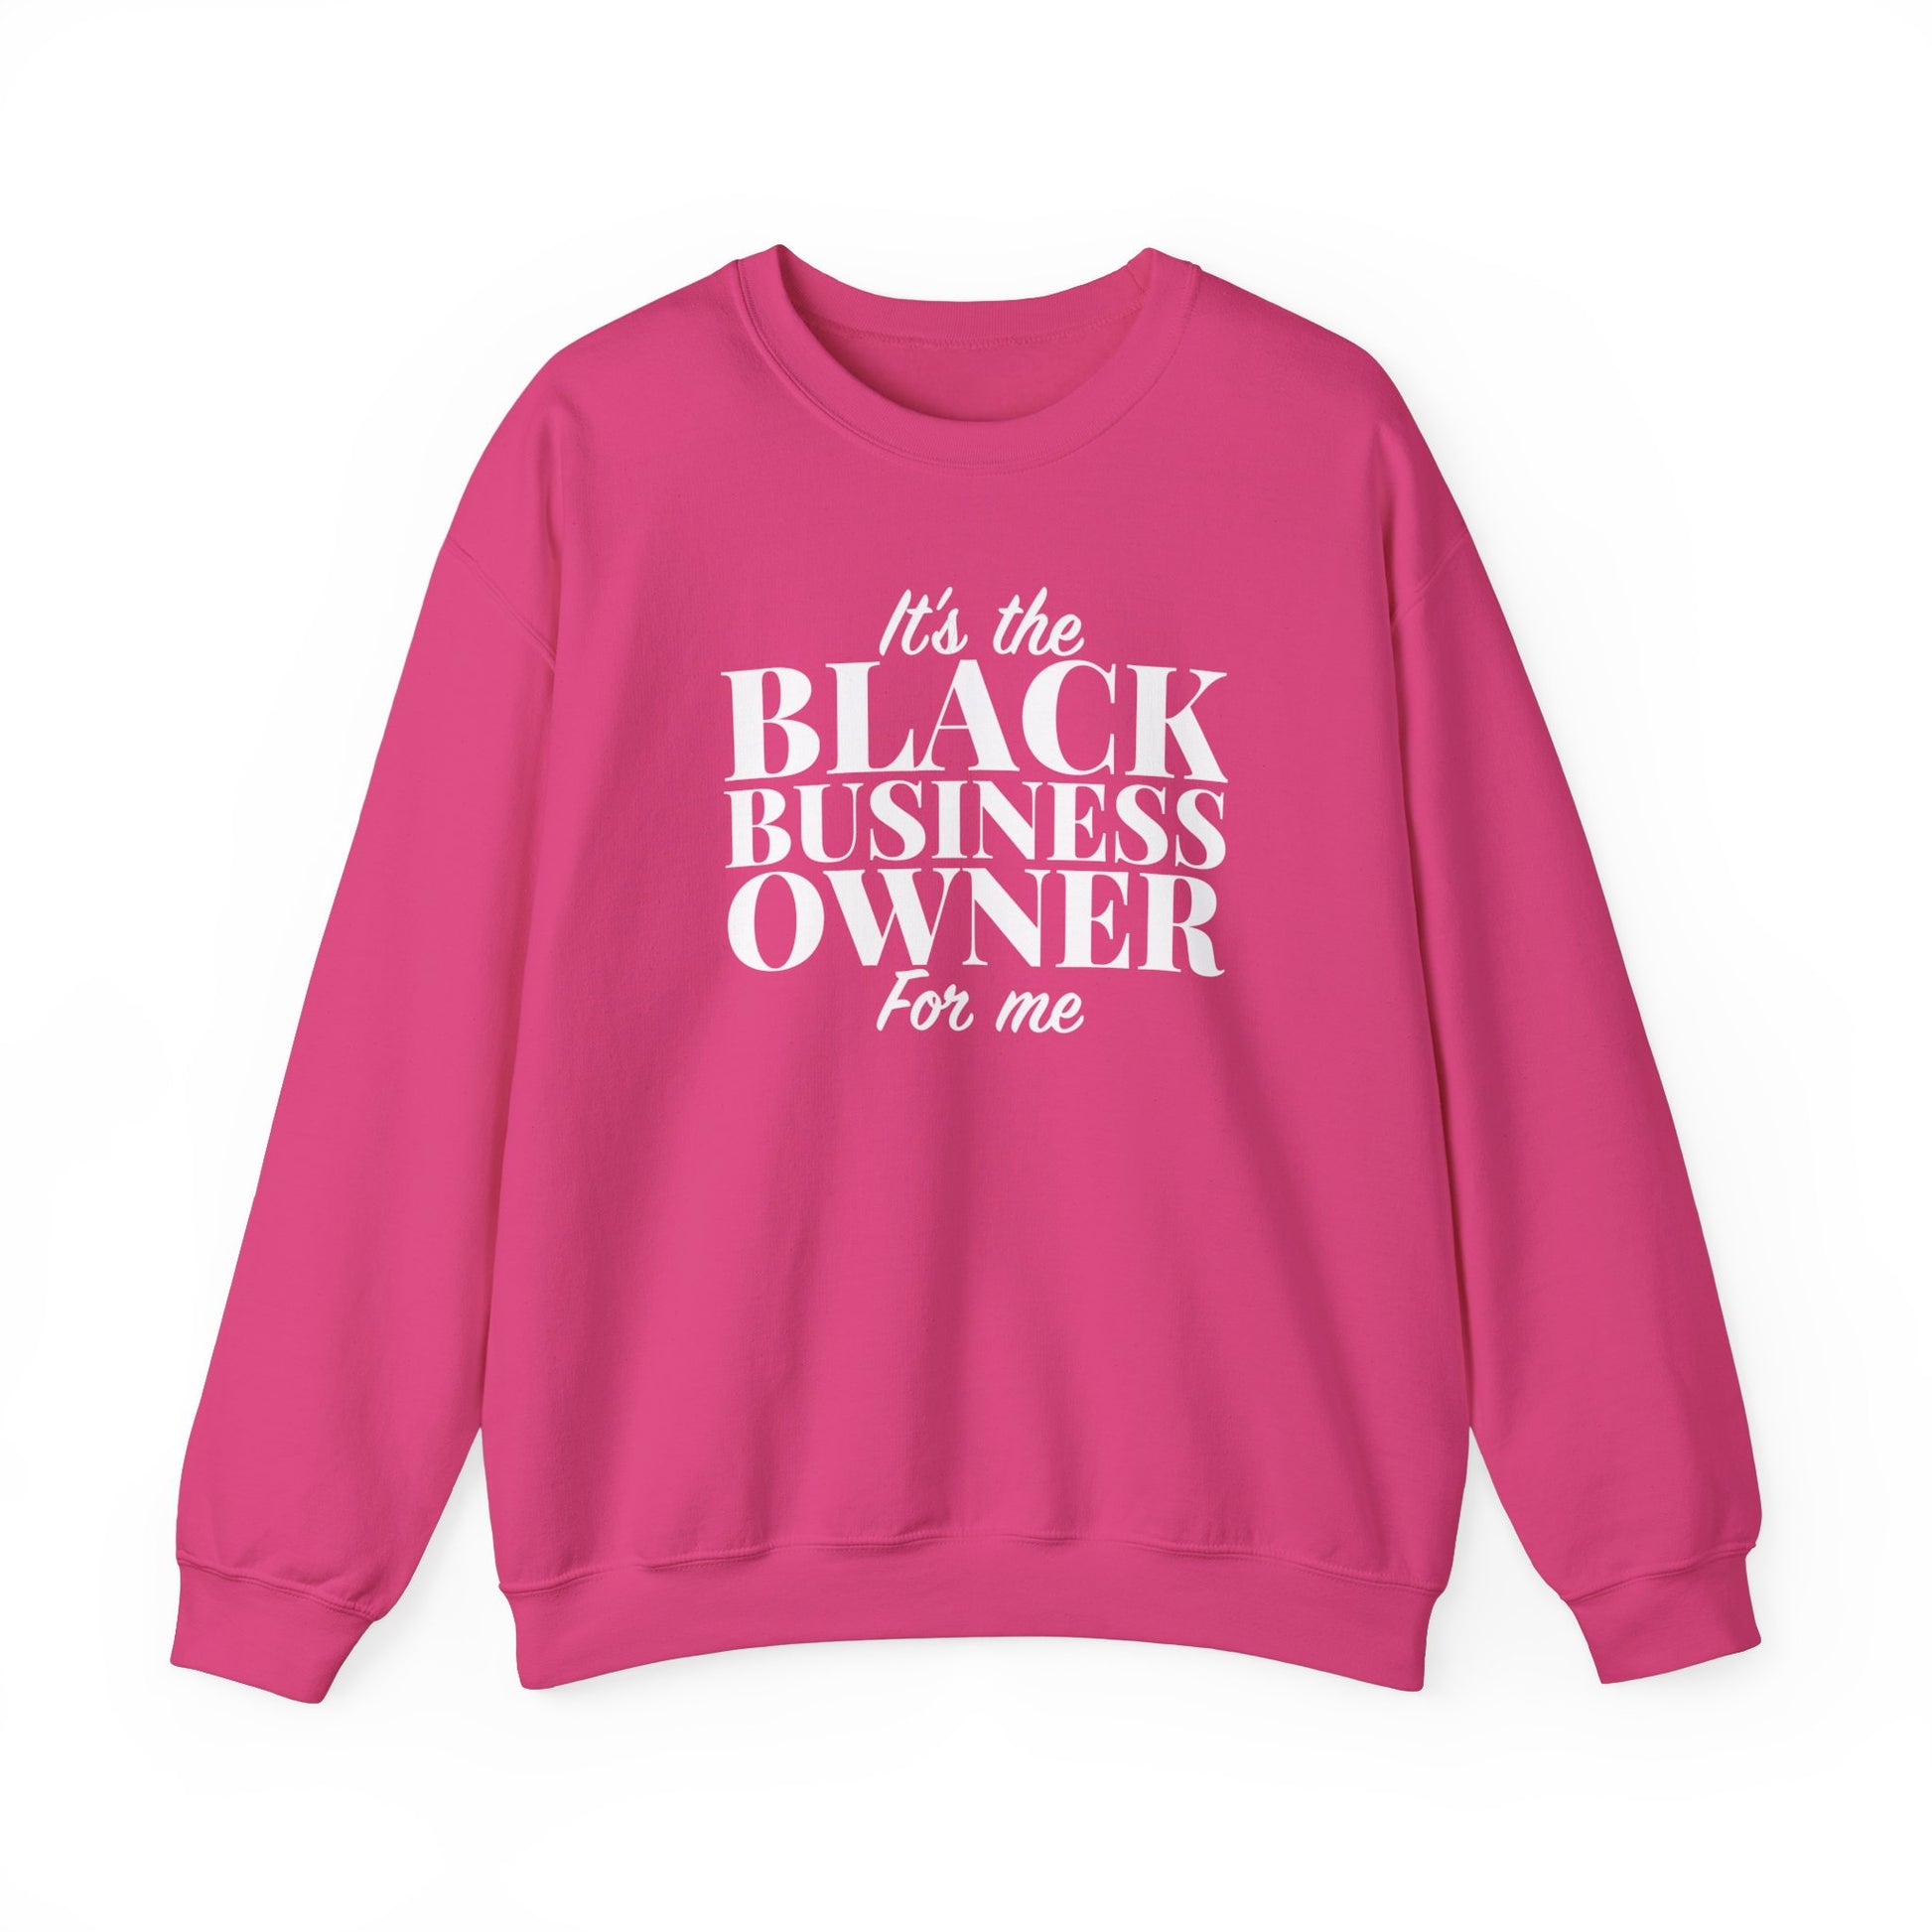 It's The Black Business Owner For Me Sweatshirt